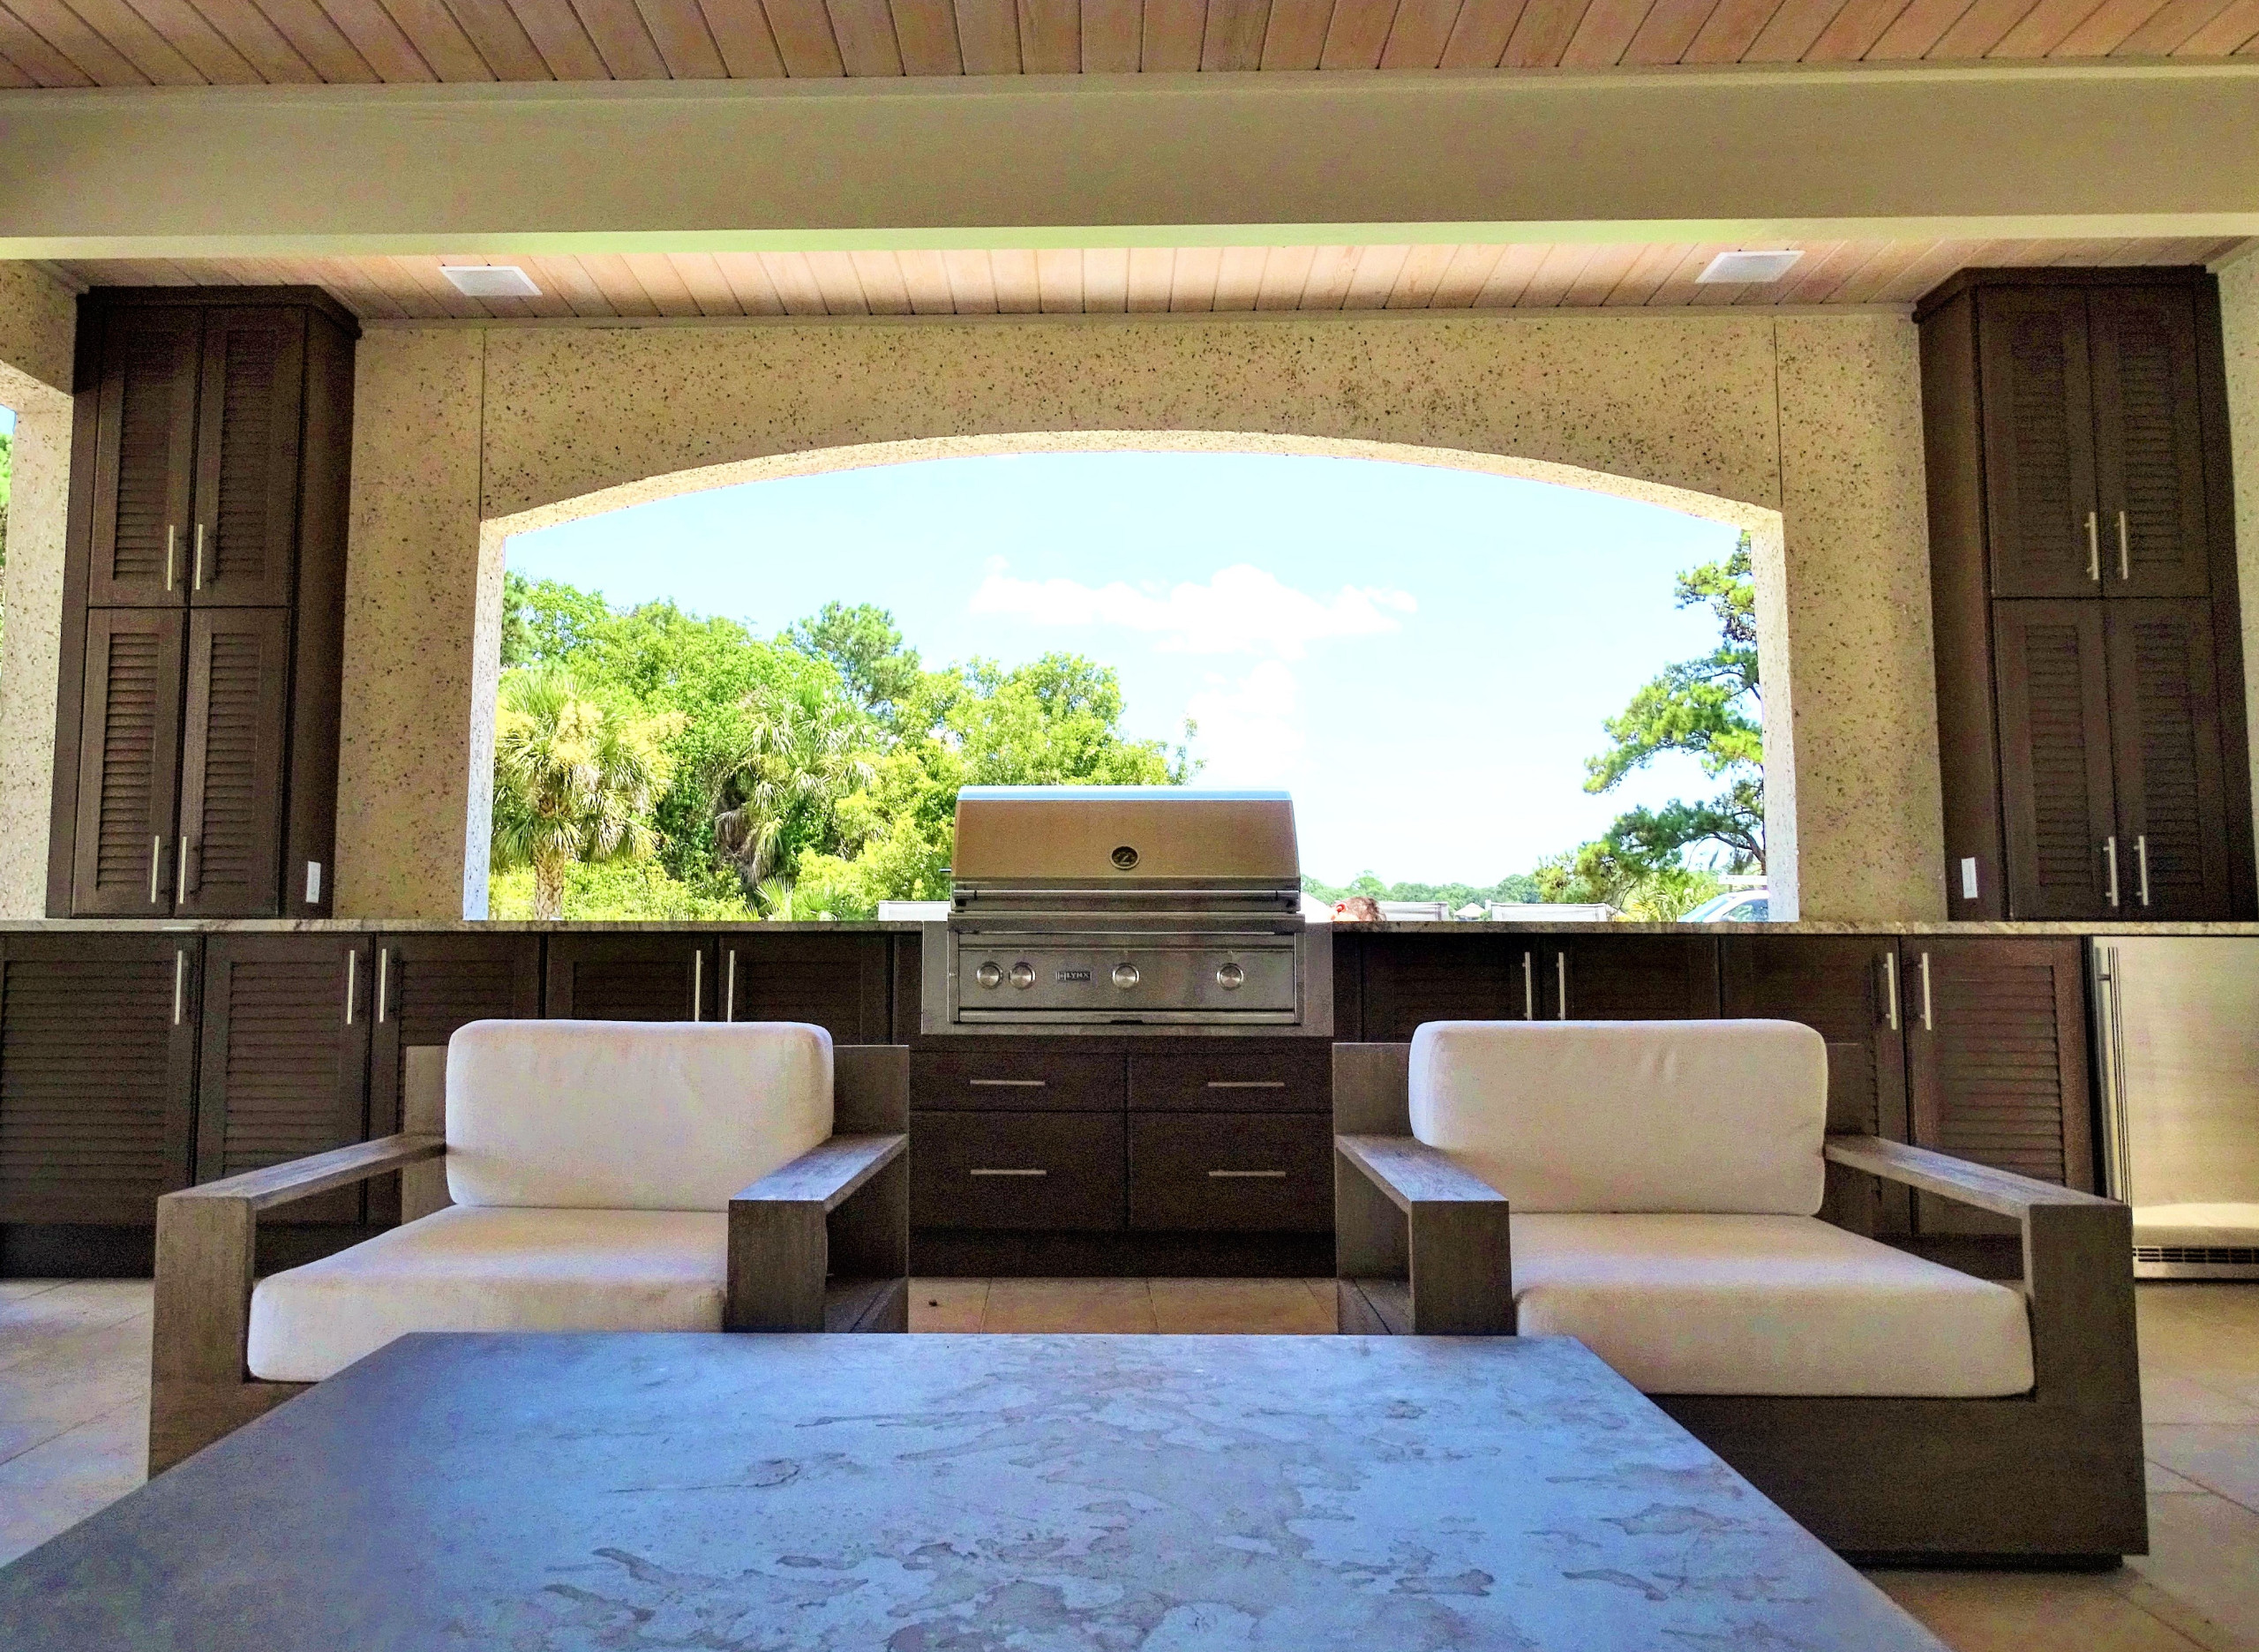 Low Country Outdoor Kitchen